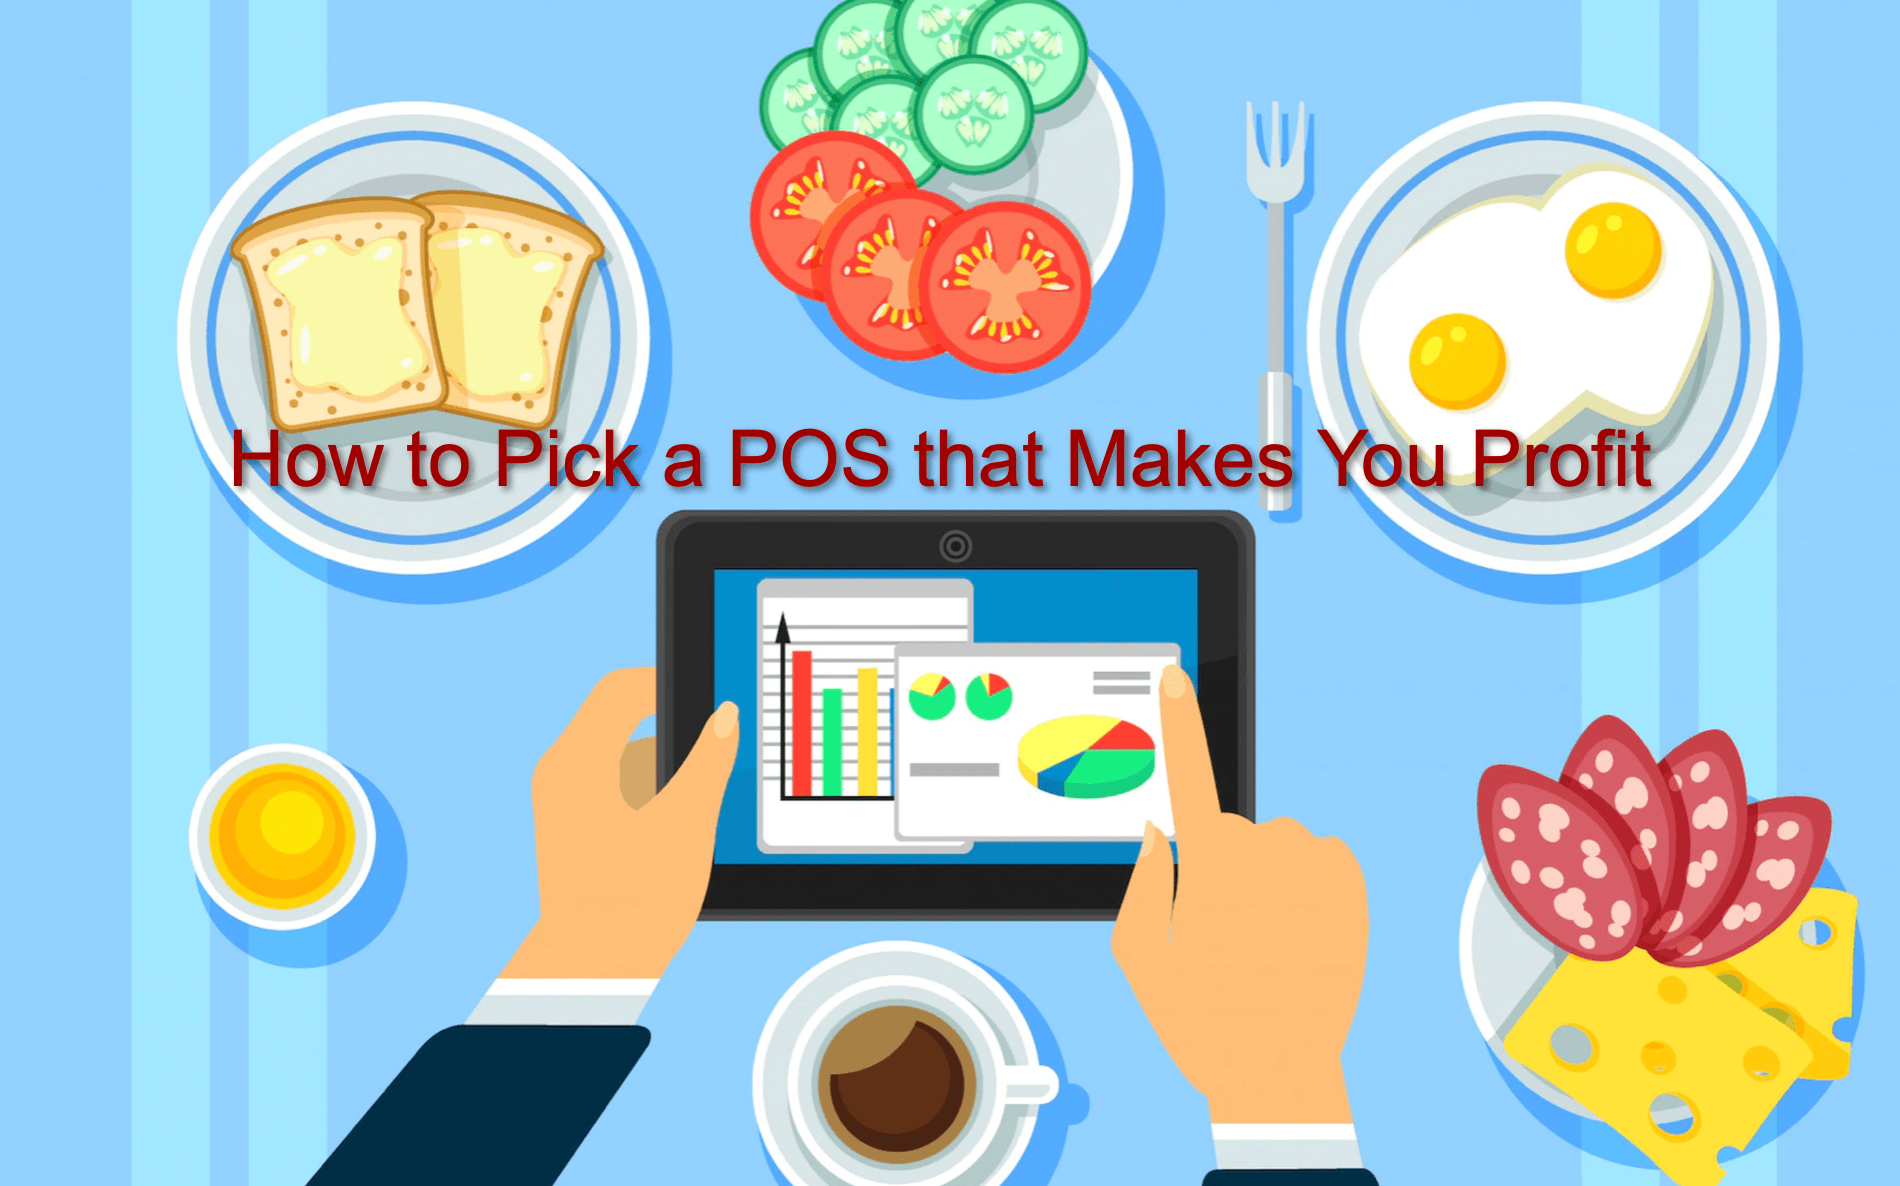 Cloud POS VS Legacy POS VS Hybrid POS: Which is Best for You?